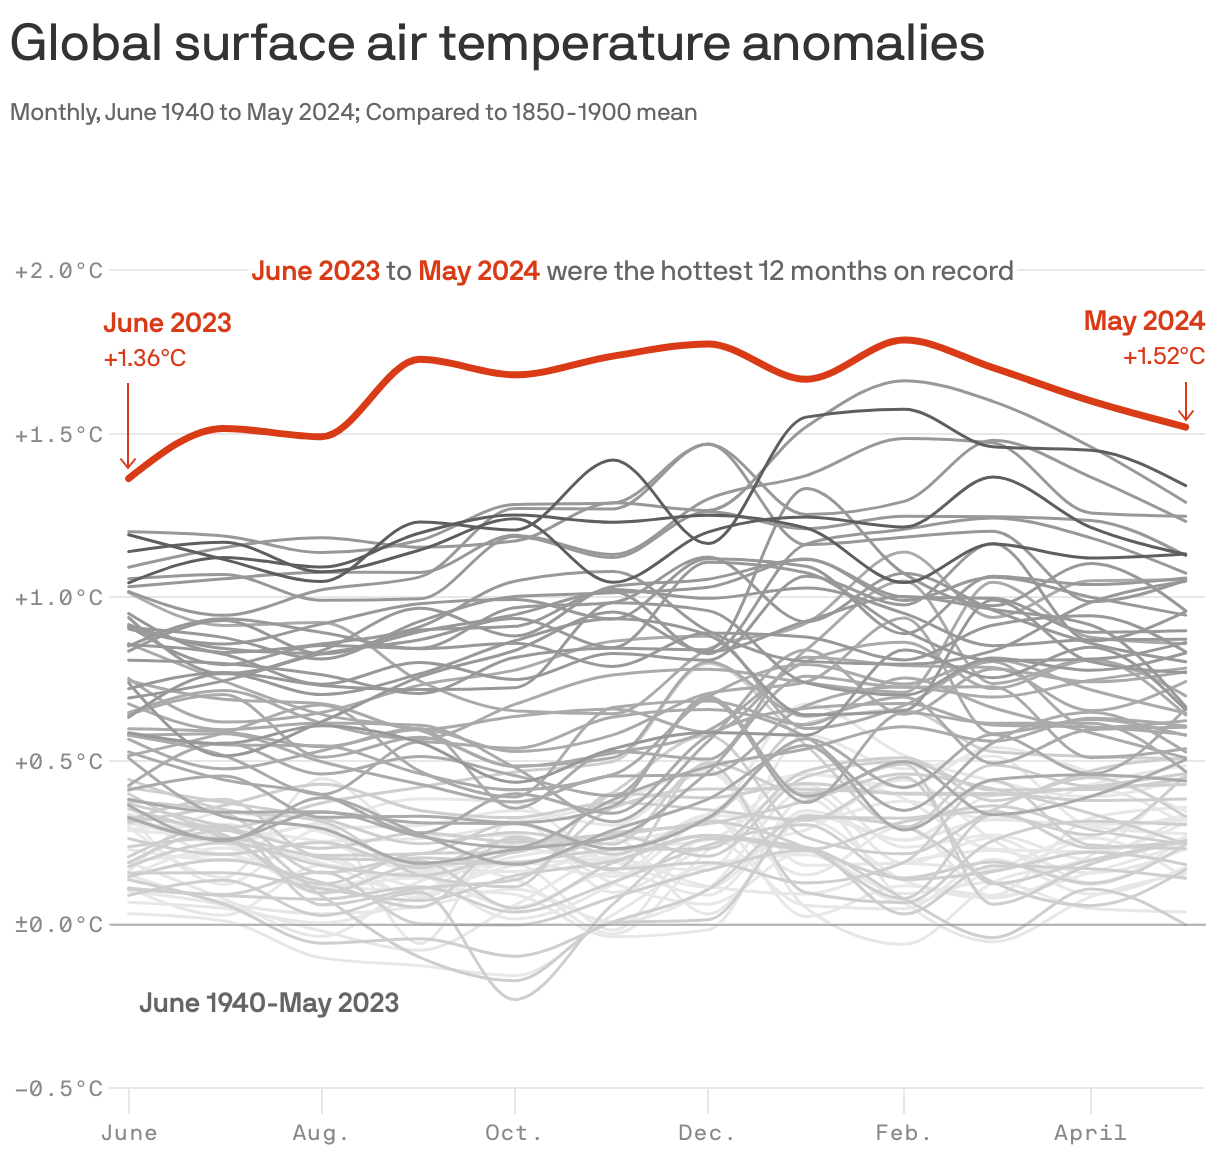 Line chart showing how 2024 global surface air temperature anomalies have far exceeded 1940-2023 anomalies compared to the preindustrial average. The anomaly was +1.66°C in January 2024, +1.77°C in February 2024 and +1.60°C in May 2024. June 2023 to May 2024 were the hottest 12 months on record with May reaching +1.52°C.   